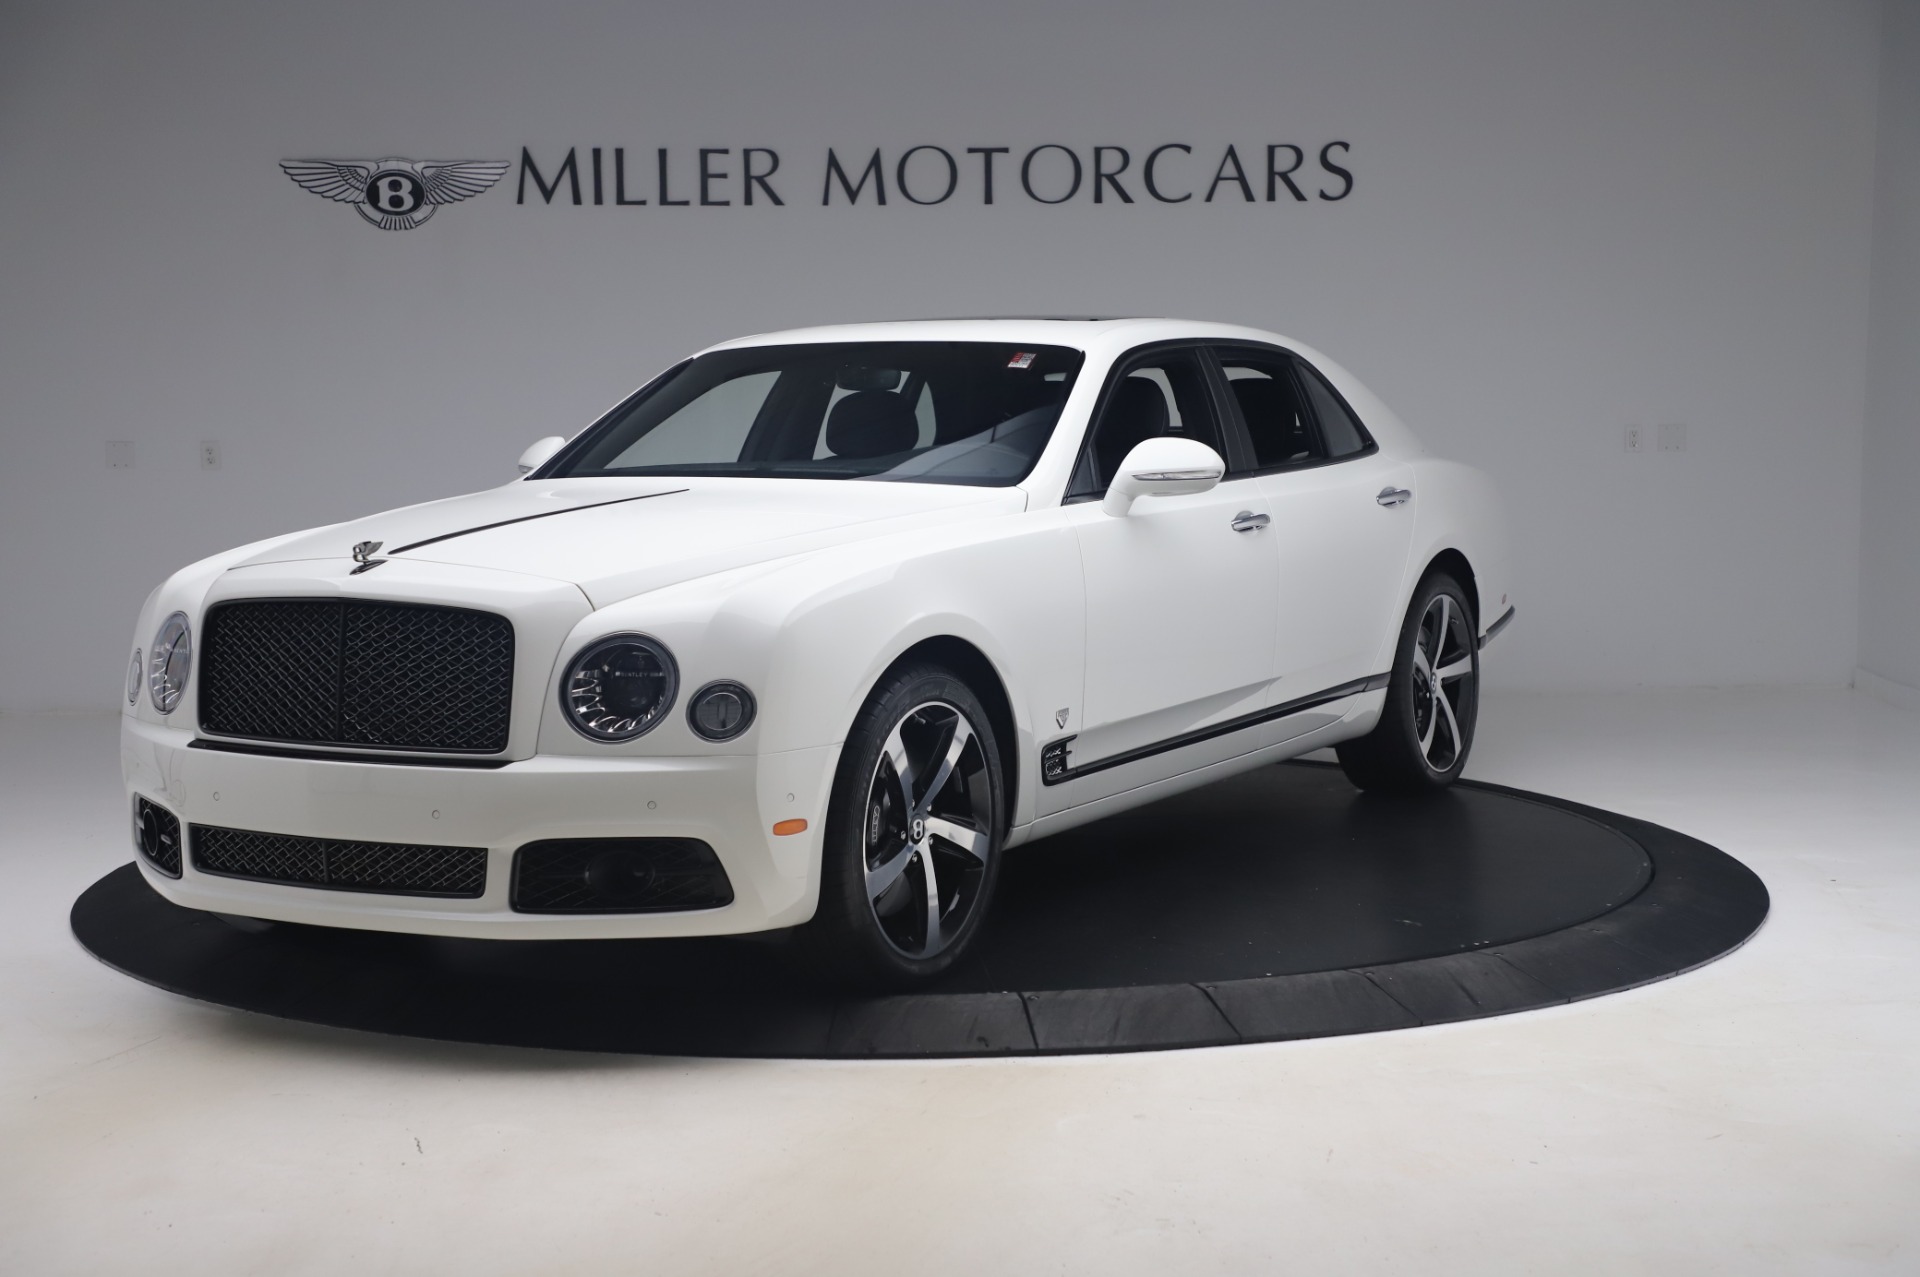 New 2020 Bentley Mulsanne 6.75 Edition by Mulliner for sale Sold at Aston Martin of Greenwich in Greenwich CT 06830 1